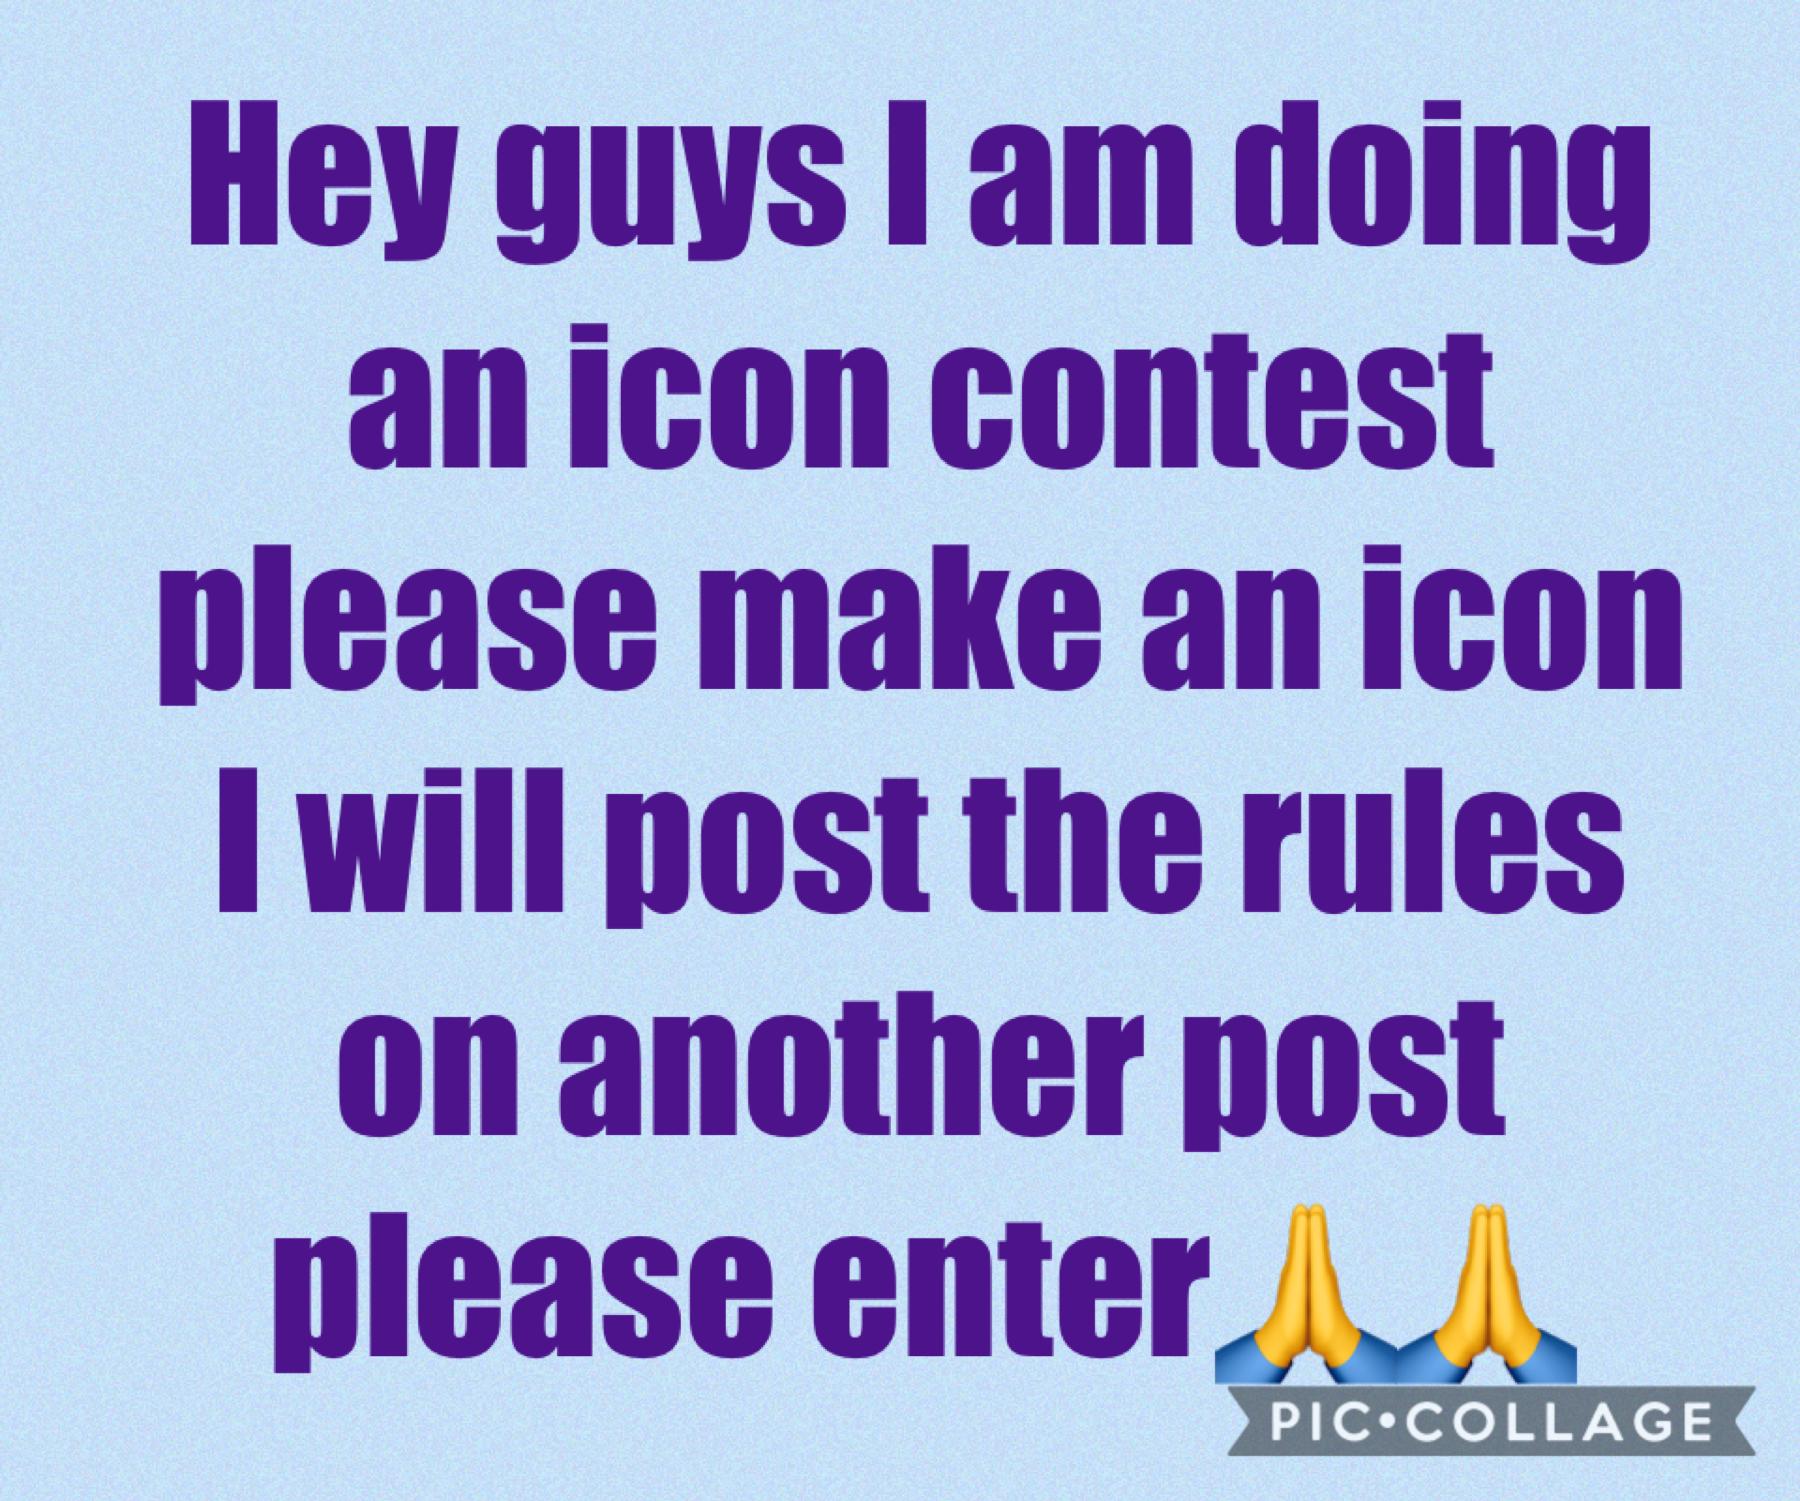 Please enter I will get the rules out as soon as possible👍👍👍